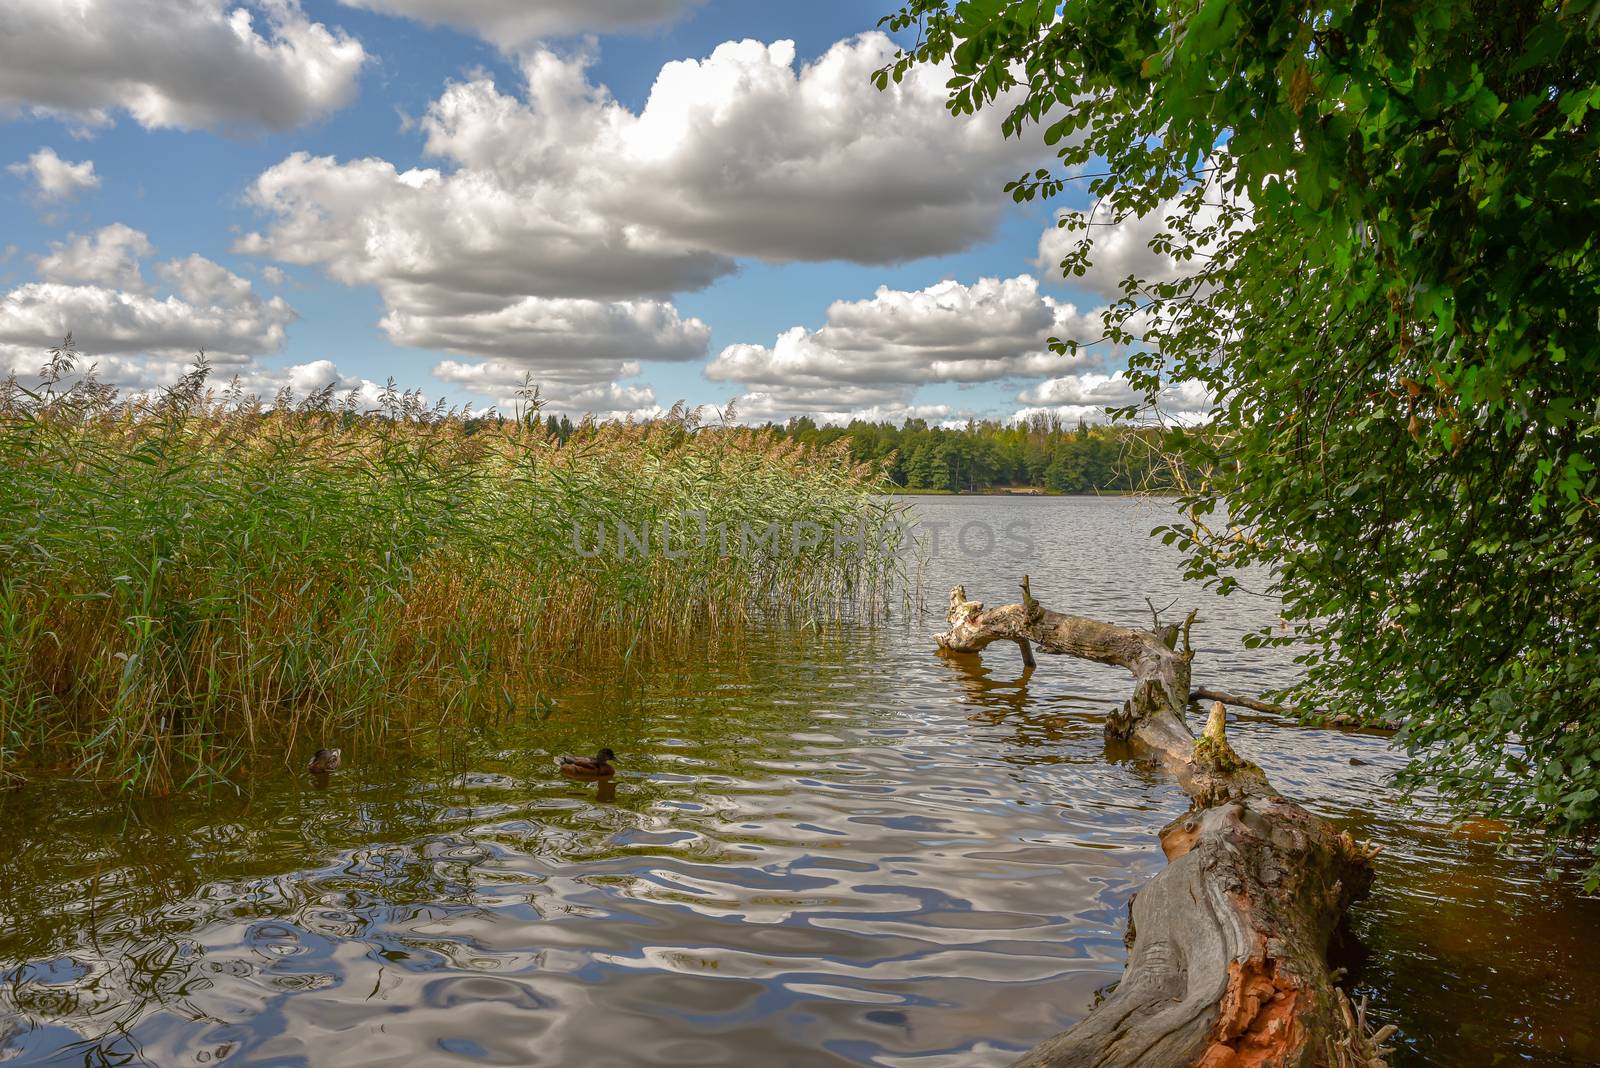 Blue sky with white clouds at lake in Poland by RobertChlopas